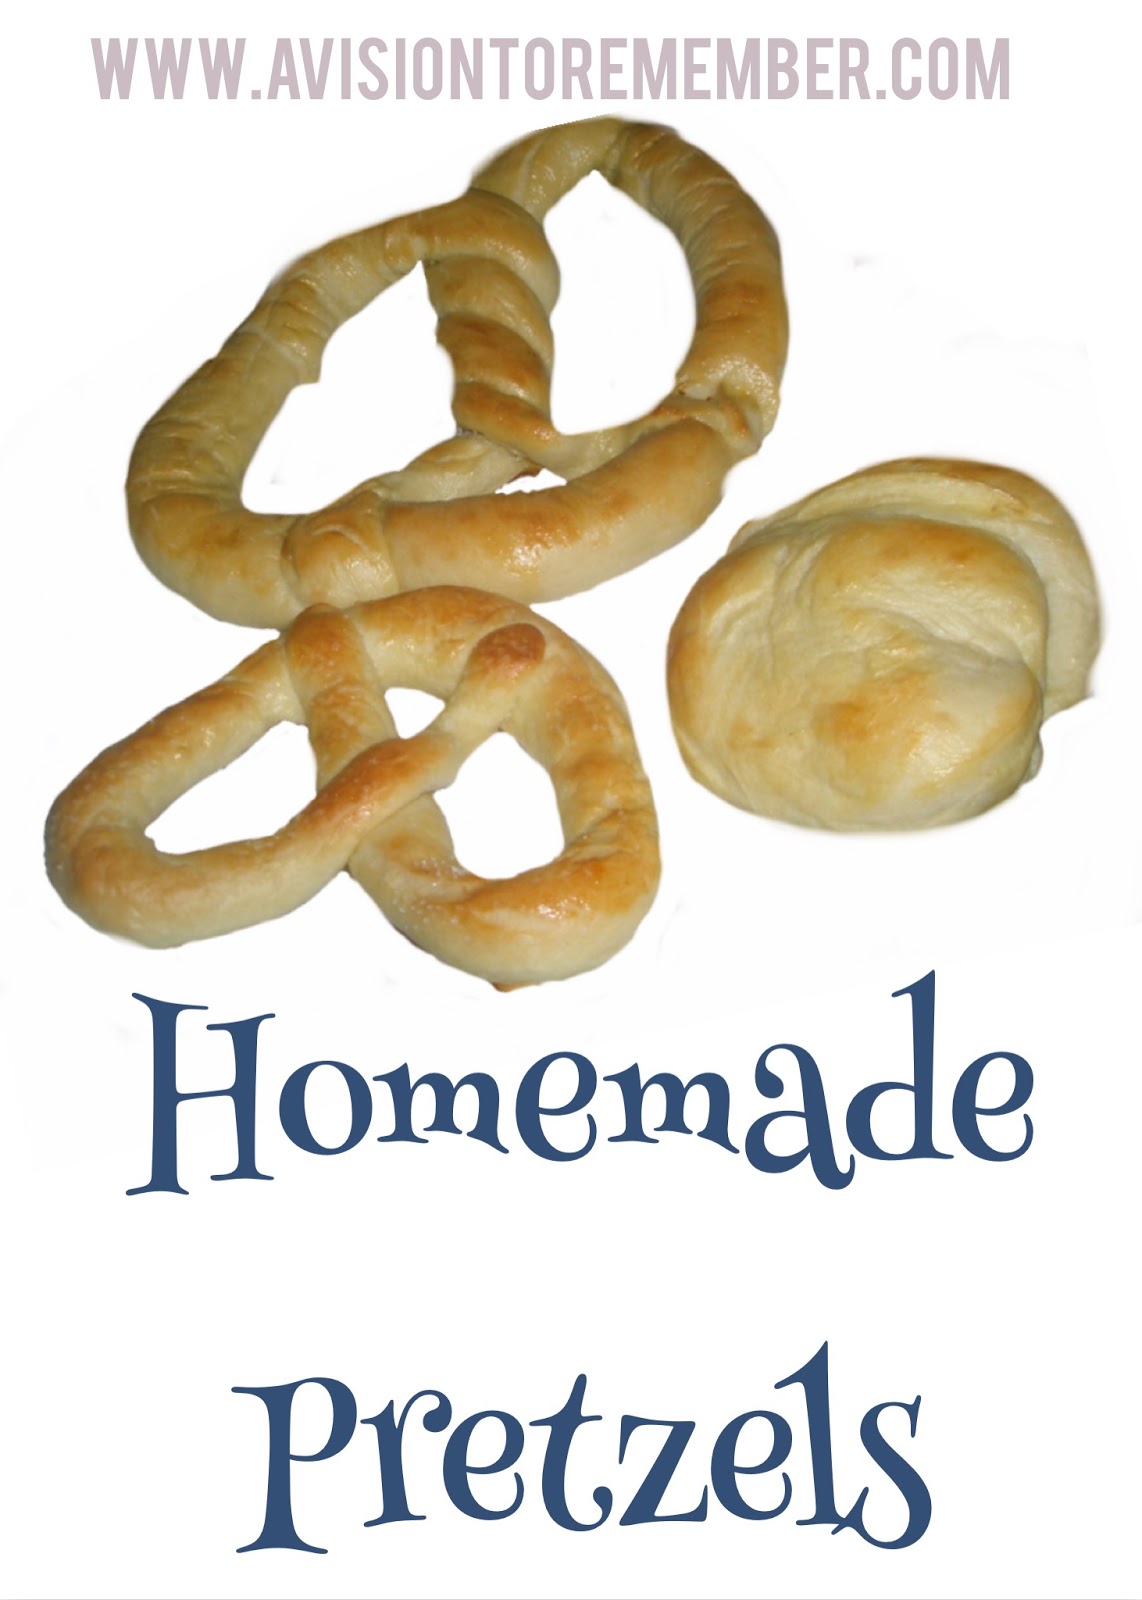 Homemade Pretzels Recipe by A Vision to Remember